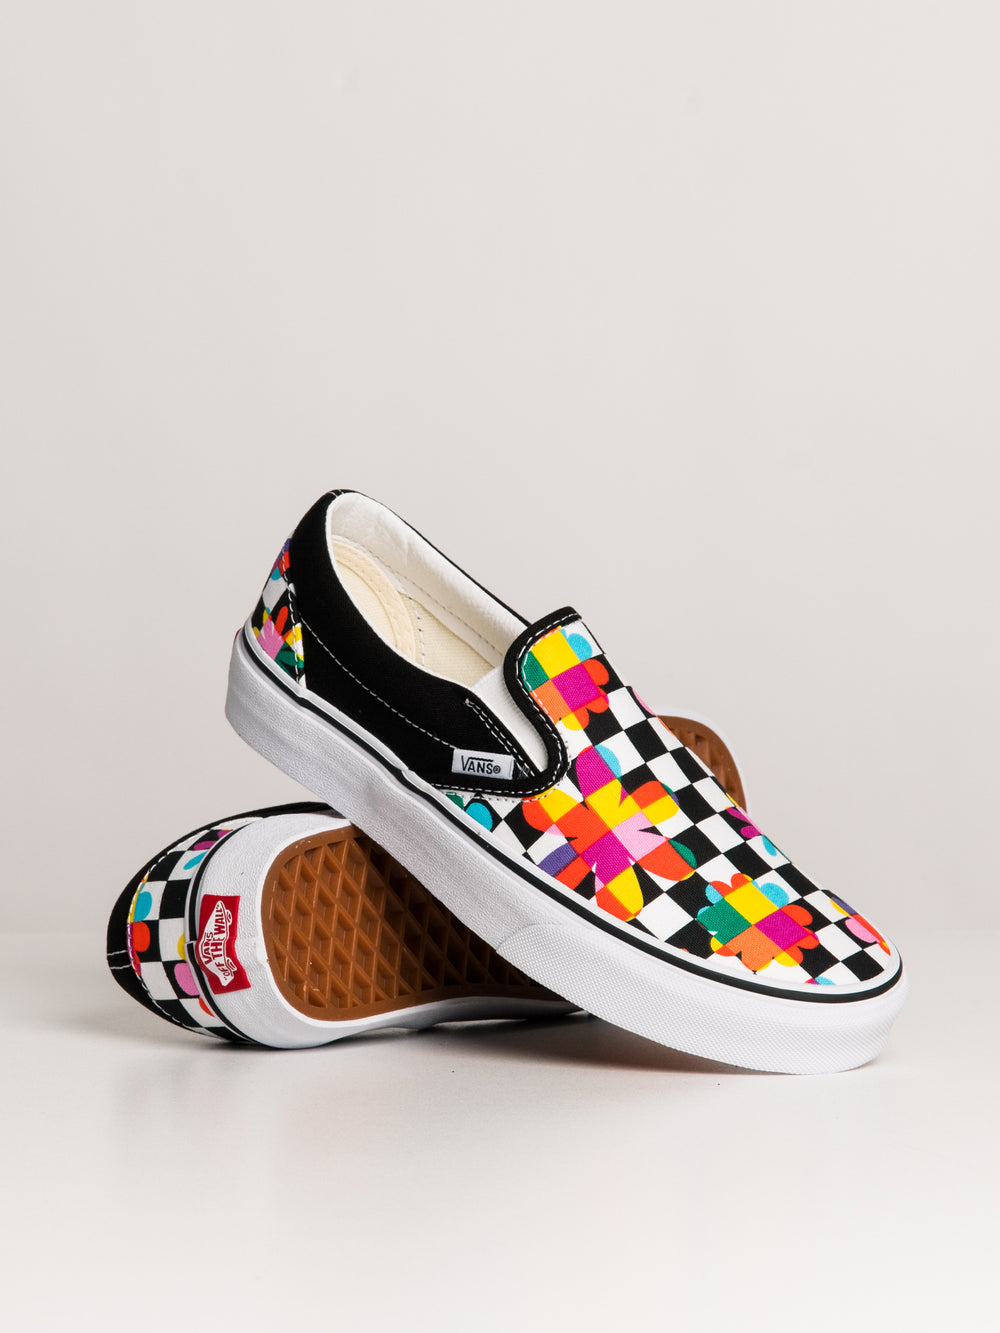 WOMENS VANS CLASSIC SLIP ON FLORAL CHECKER SNEAKER - CLEARANCE